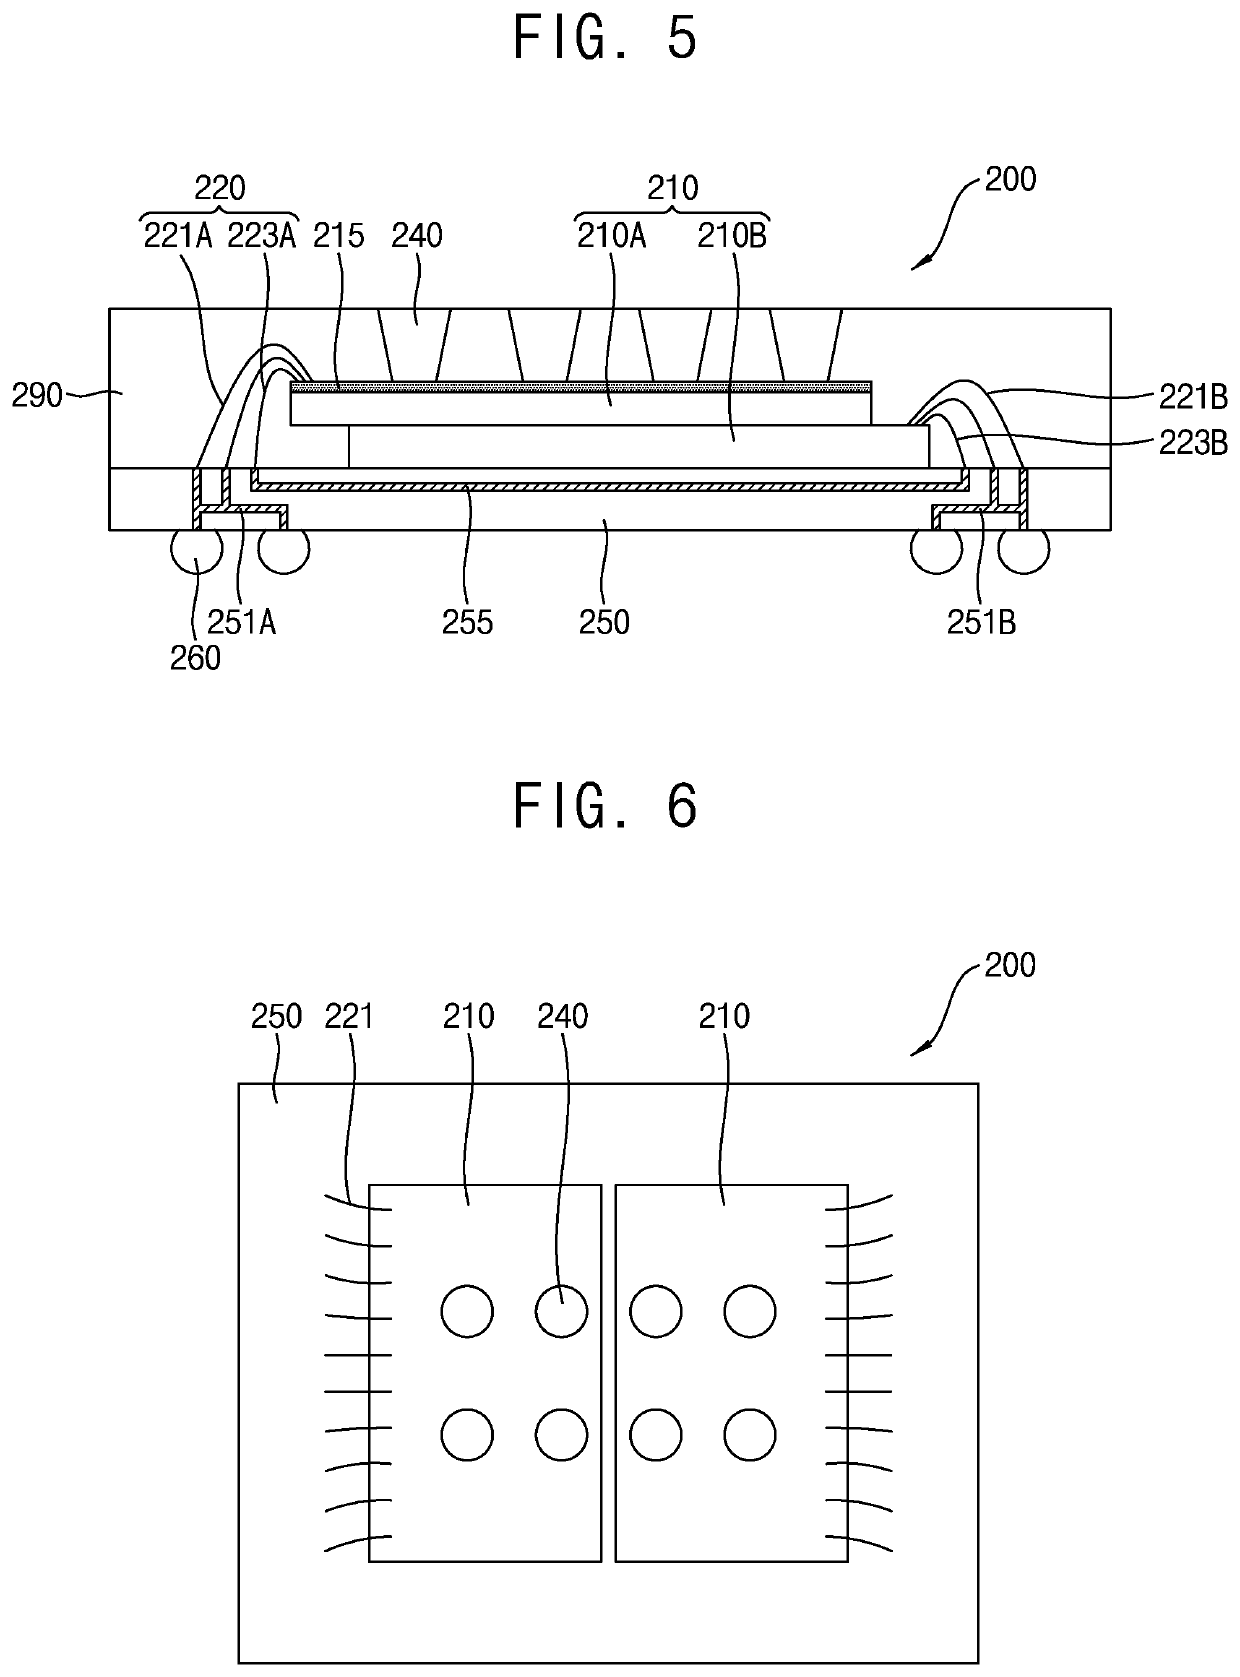 Semiconductor packages having package-on-package (POP) structures